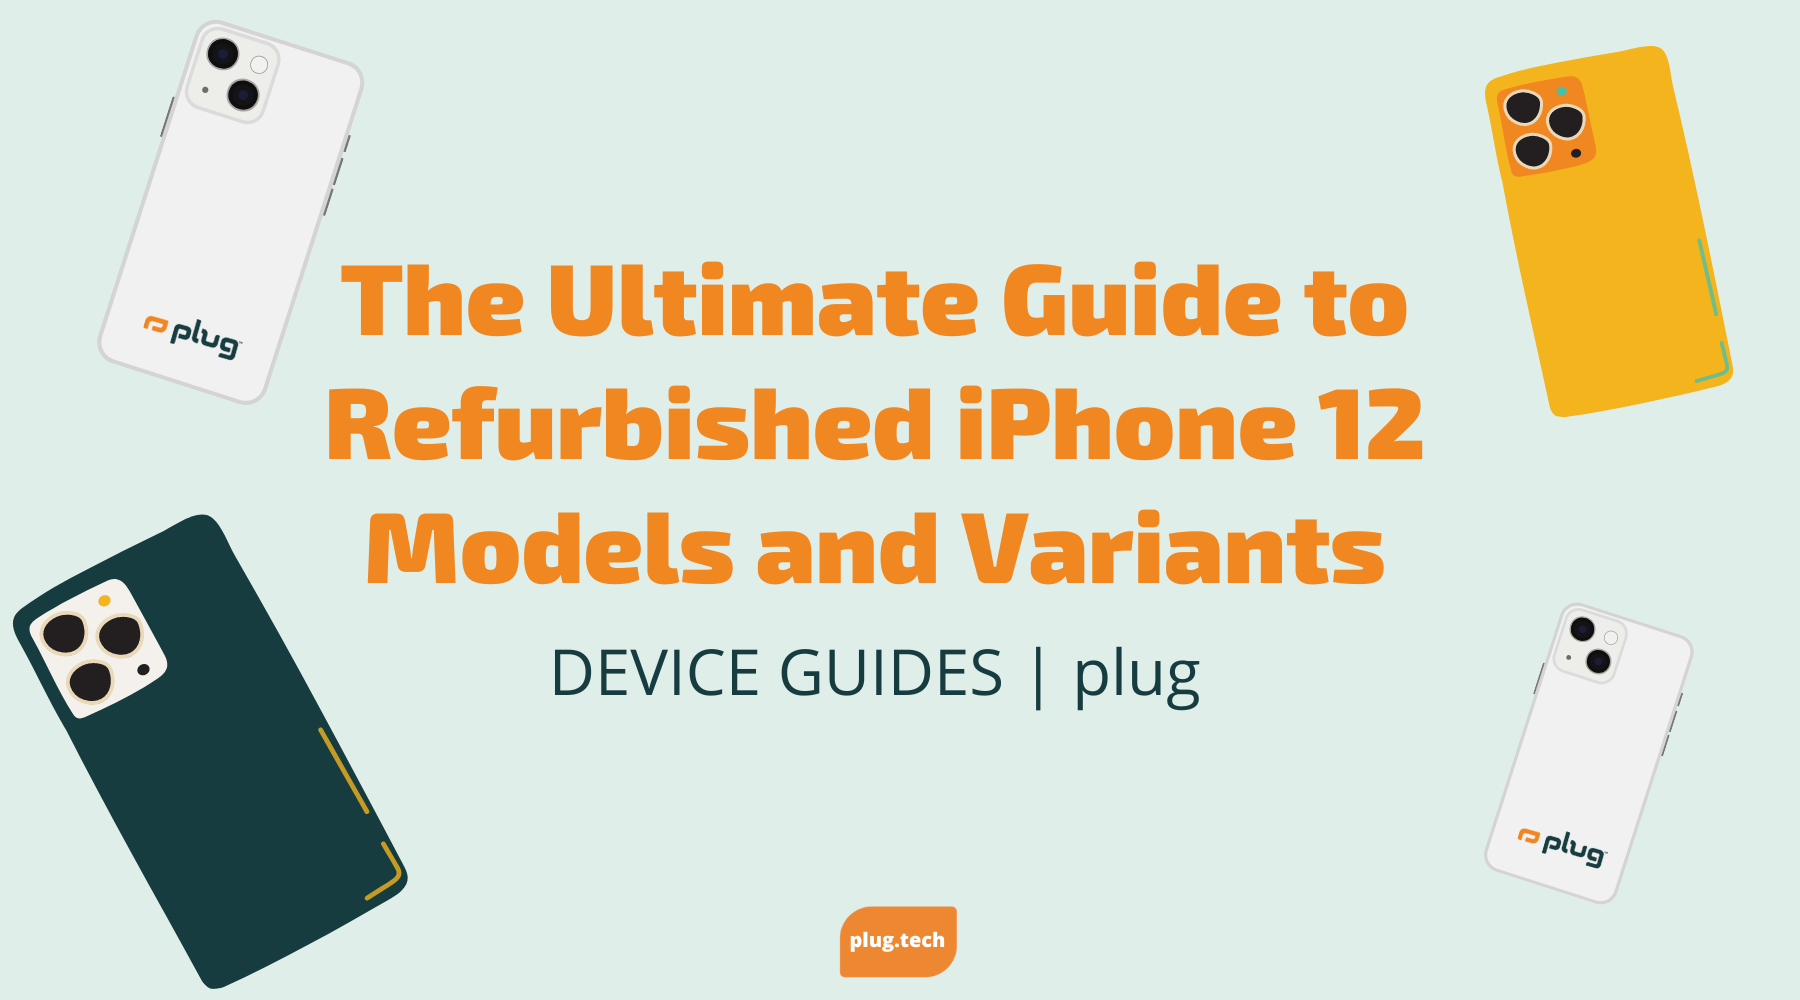 The Ultimate Guide to Refurbished iPhone 12 Models and Variants